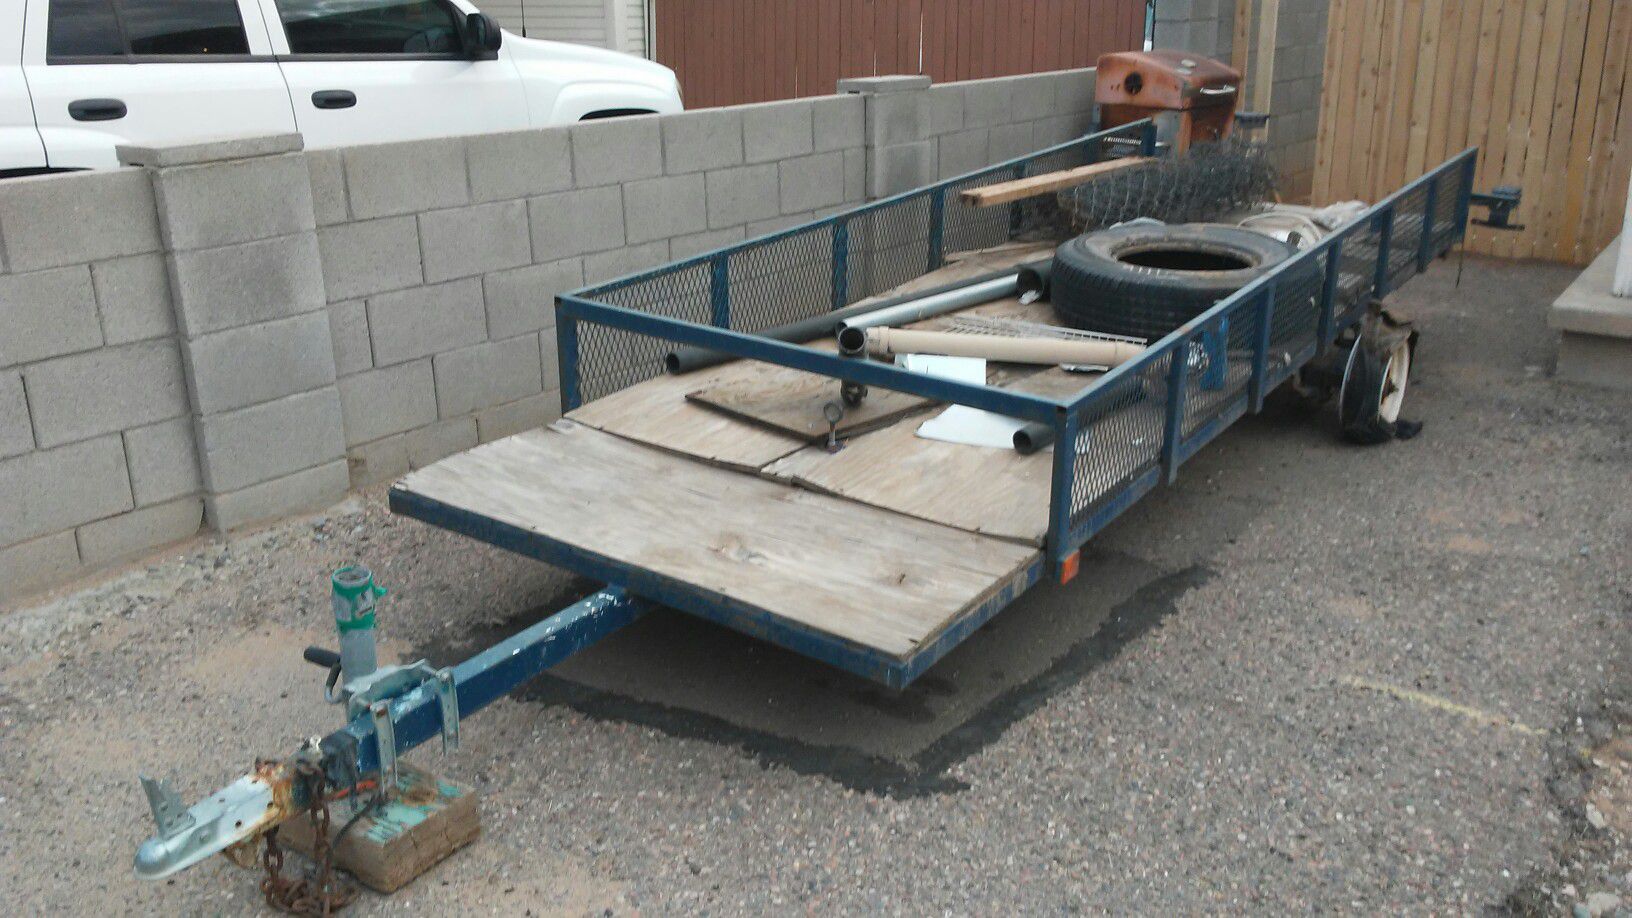 TRAILER 15 X 5 GOOD CONDITION WITH ROOM IN FRONT FOR TOOL BOX UTILITY